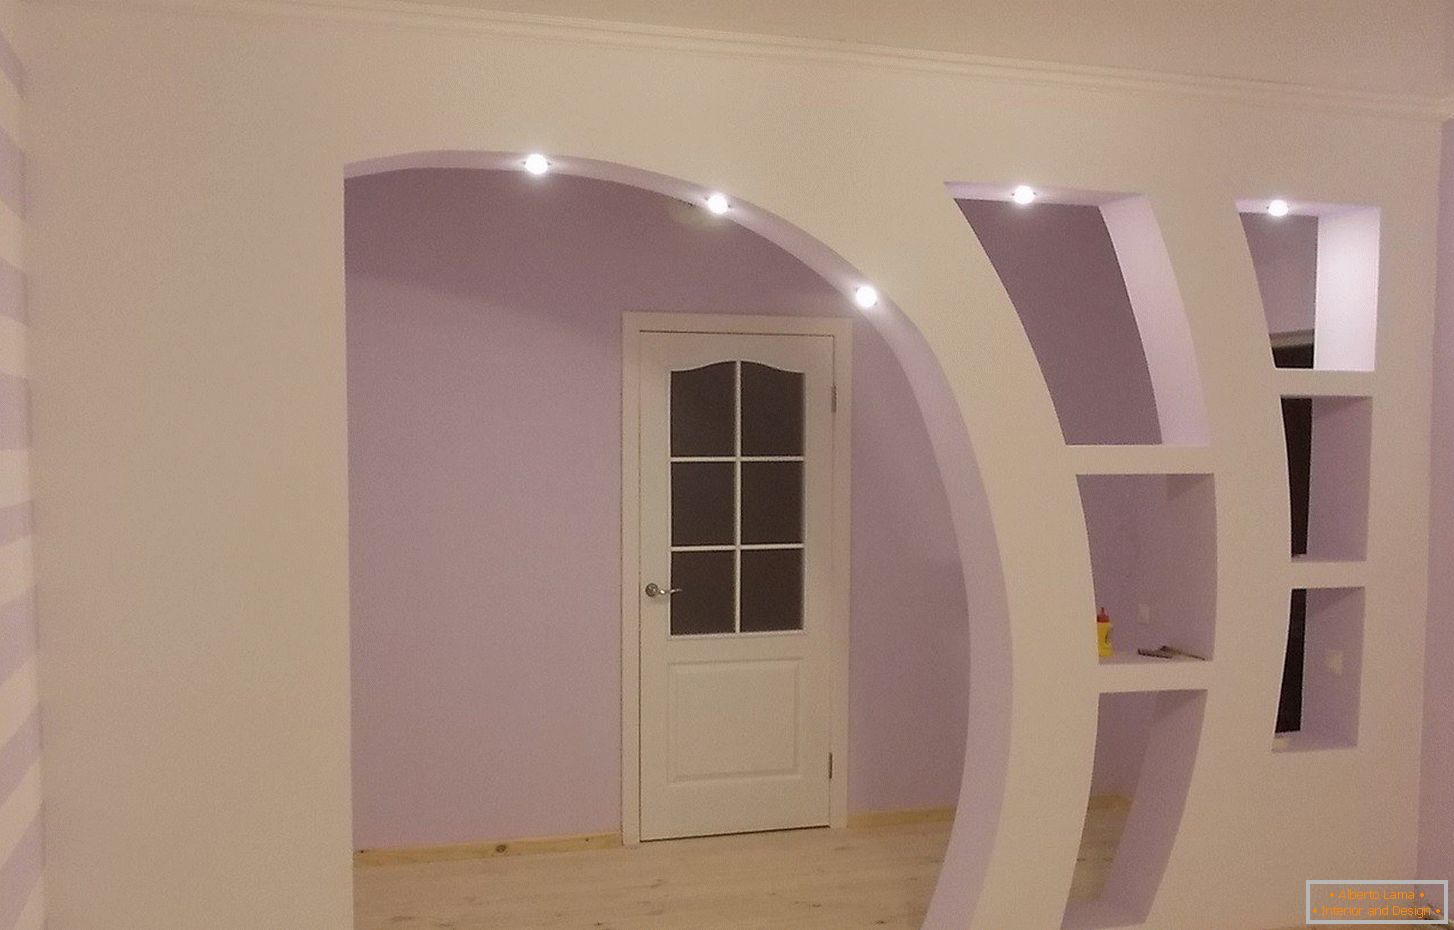 Arch of unusual form of plasterboard